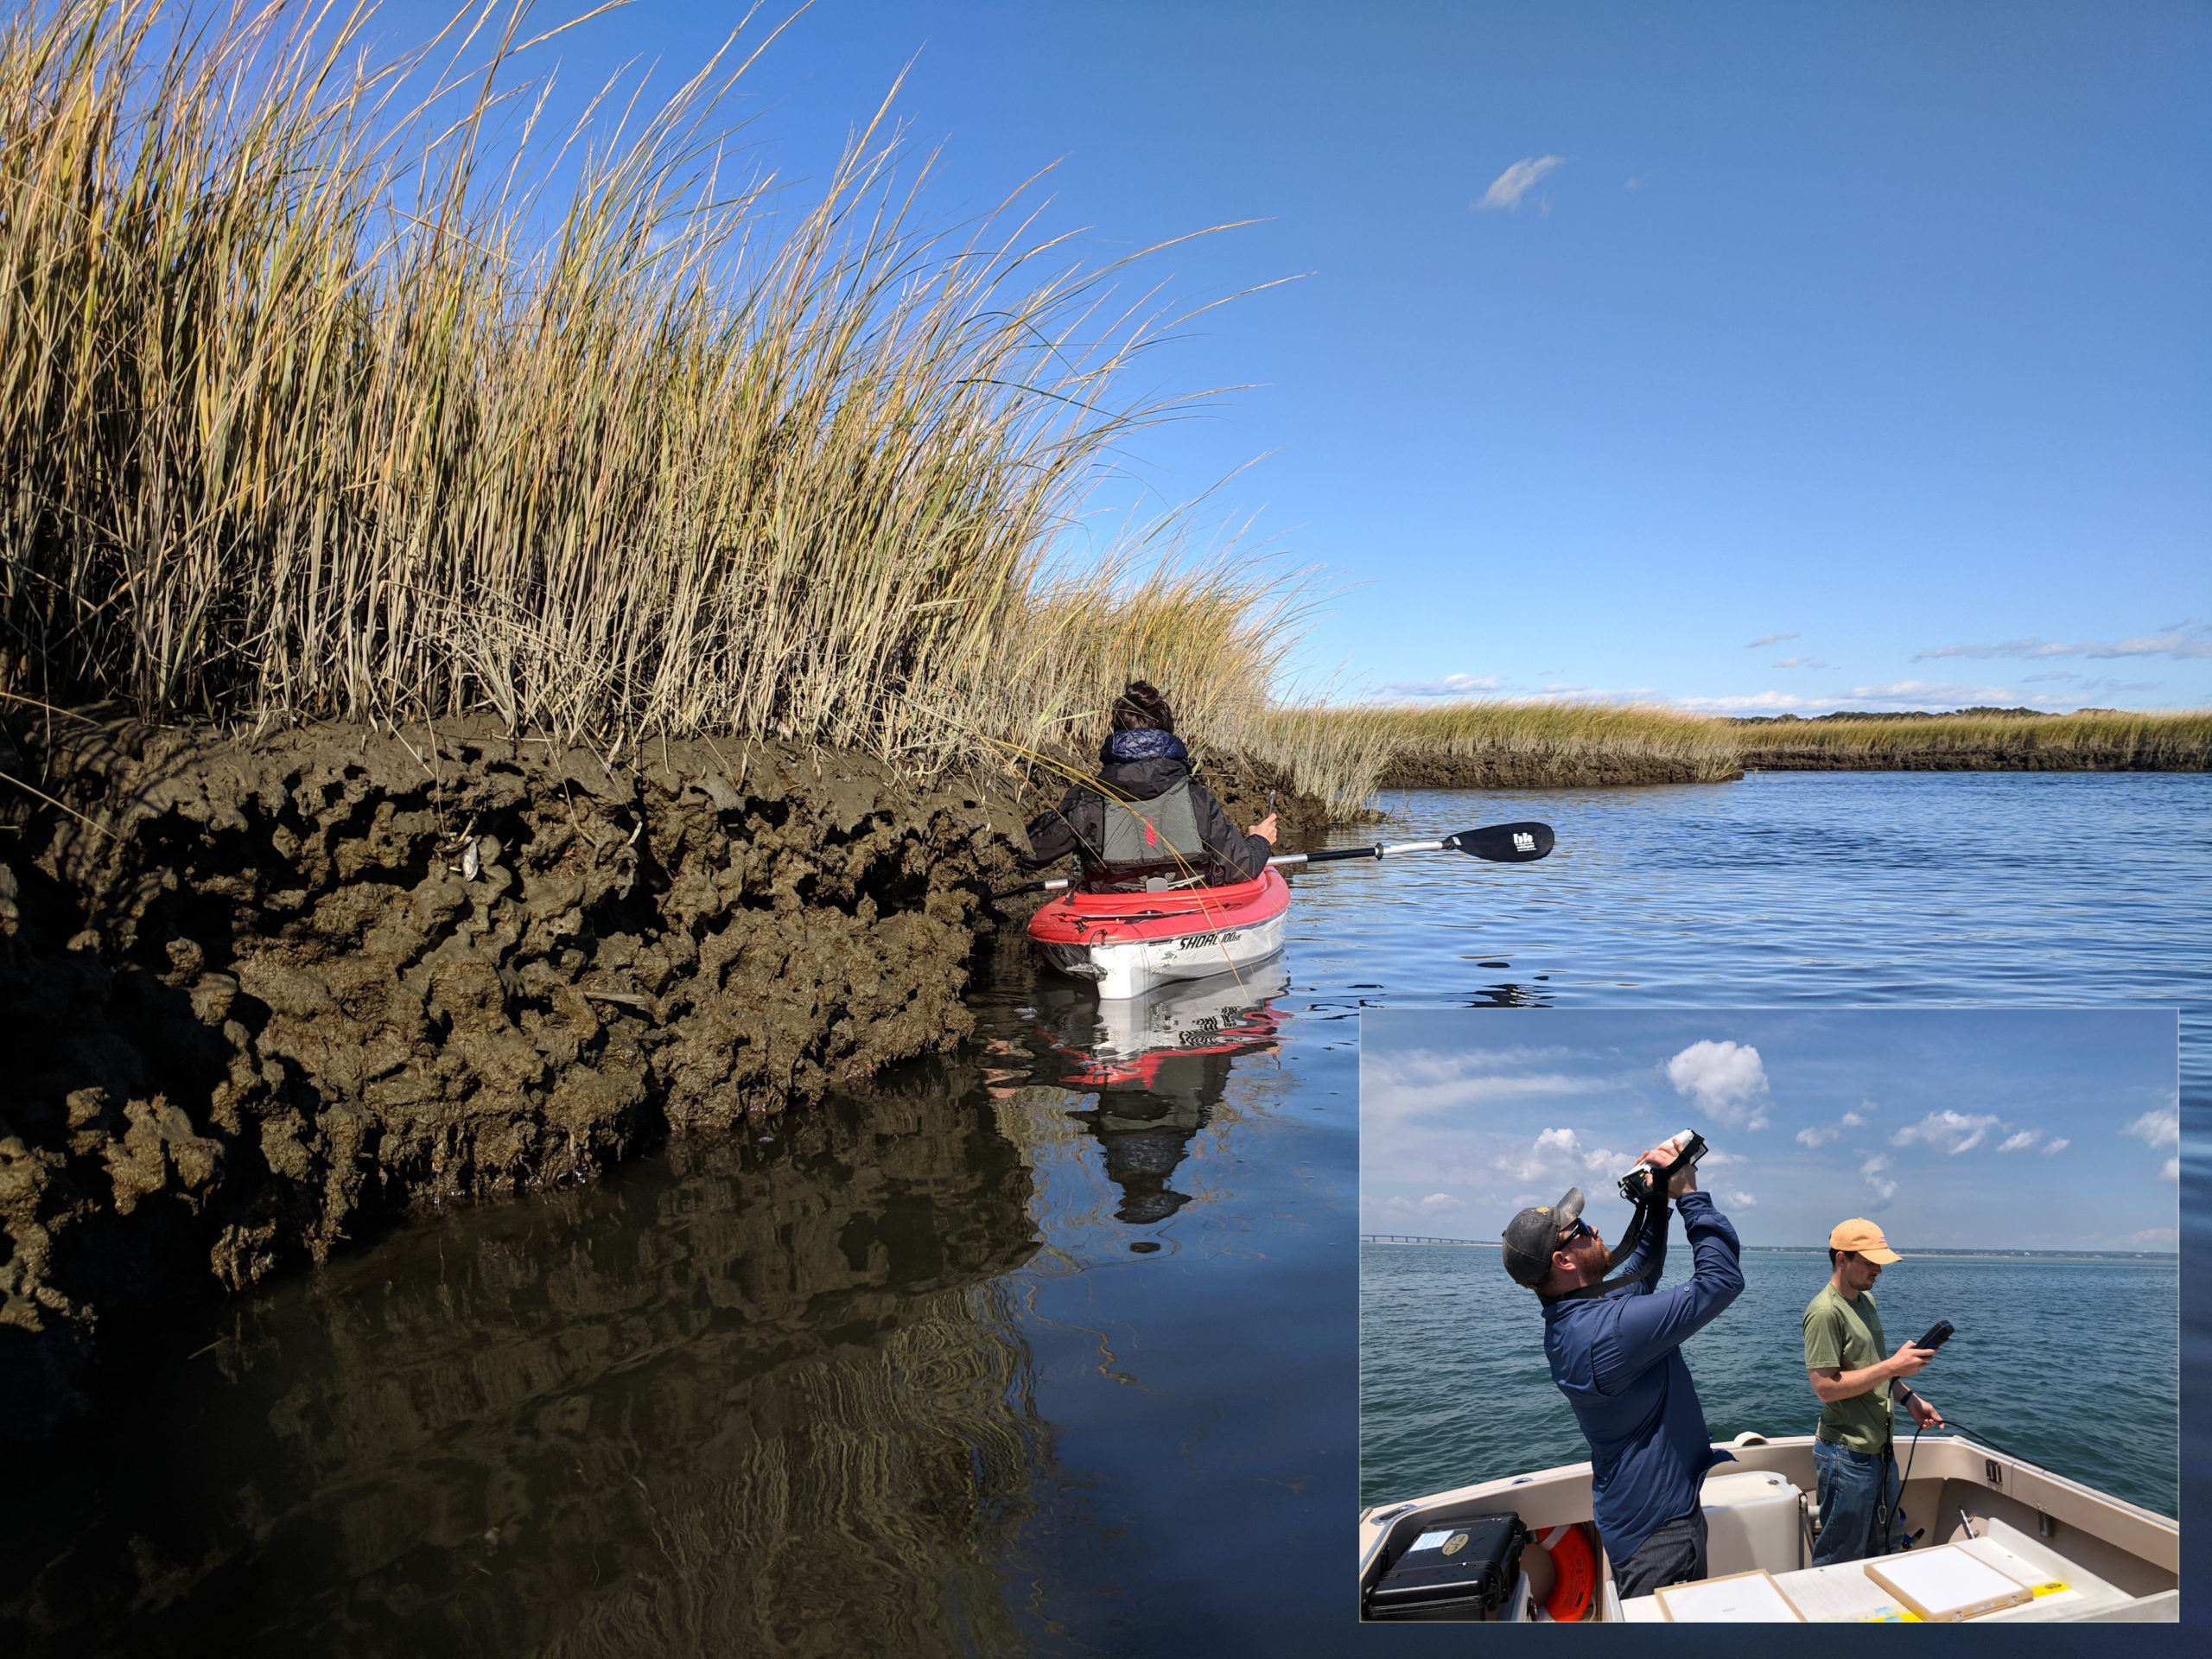 Nine research projects focus on Long Island Sound marshes, water